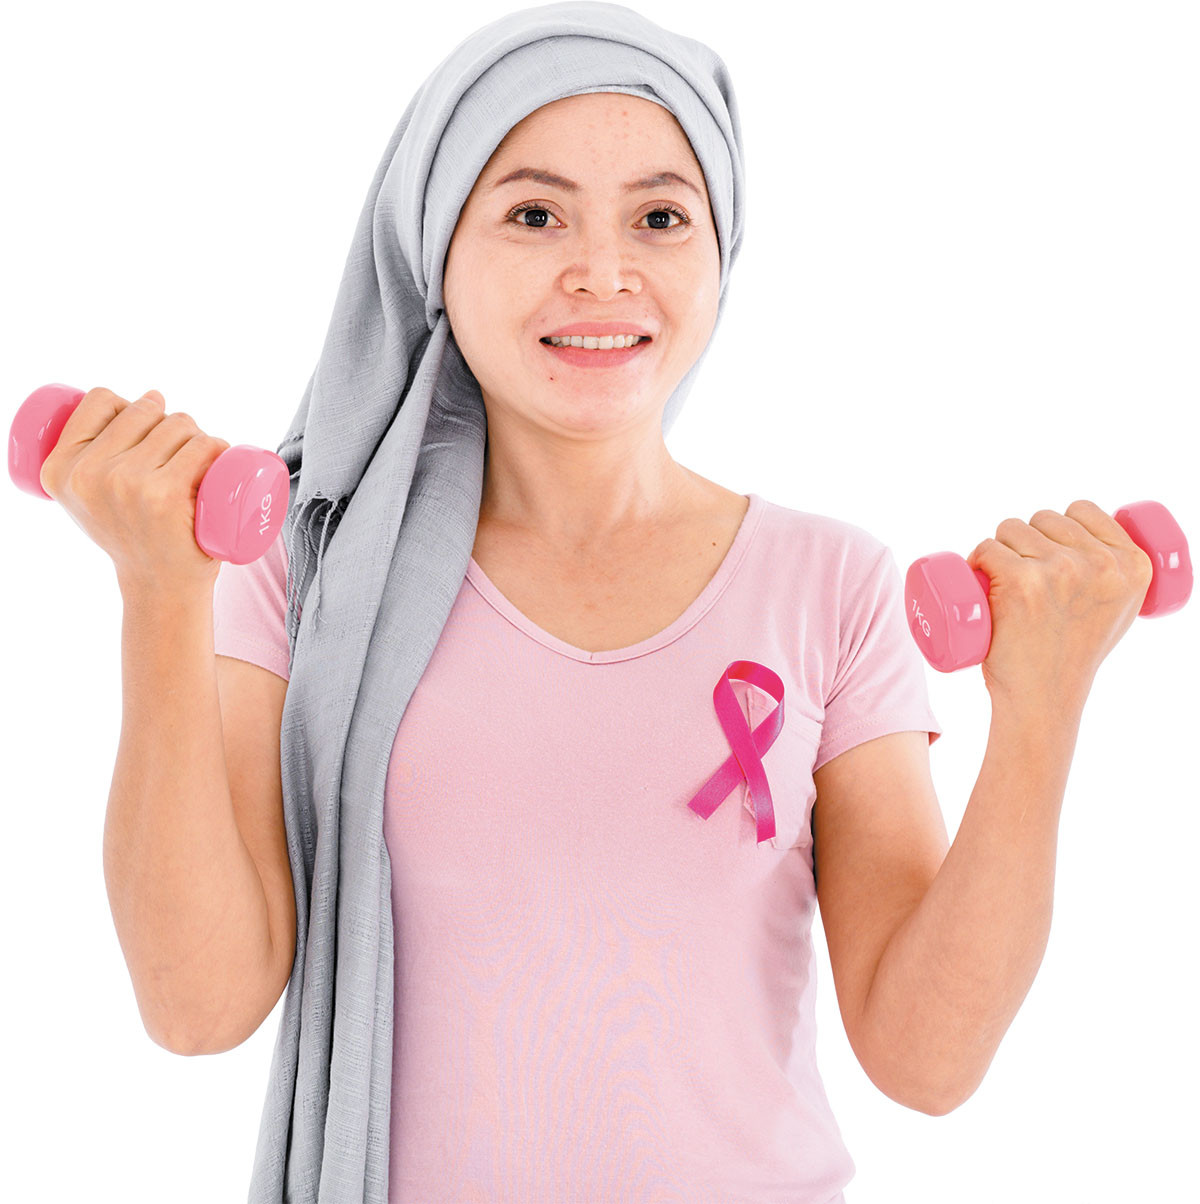 photo of a woman who has undergone breast cancer treatment lifting hand weights